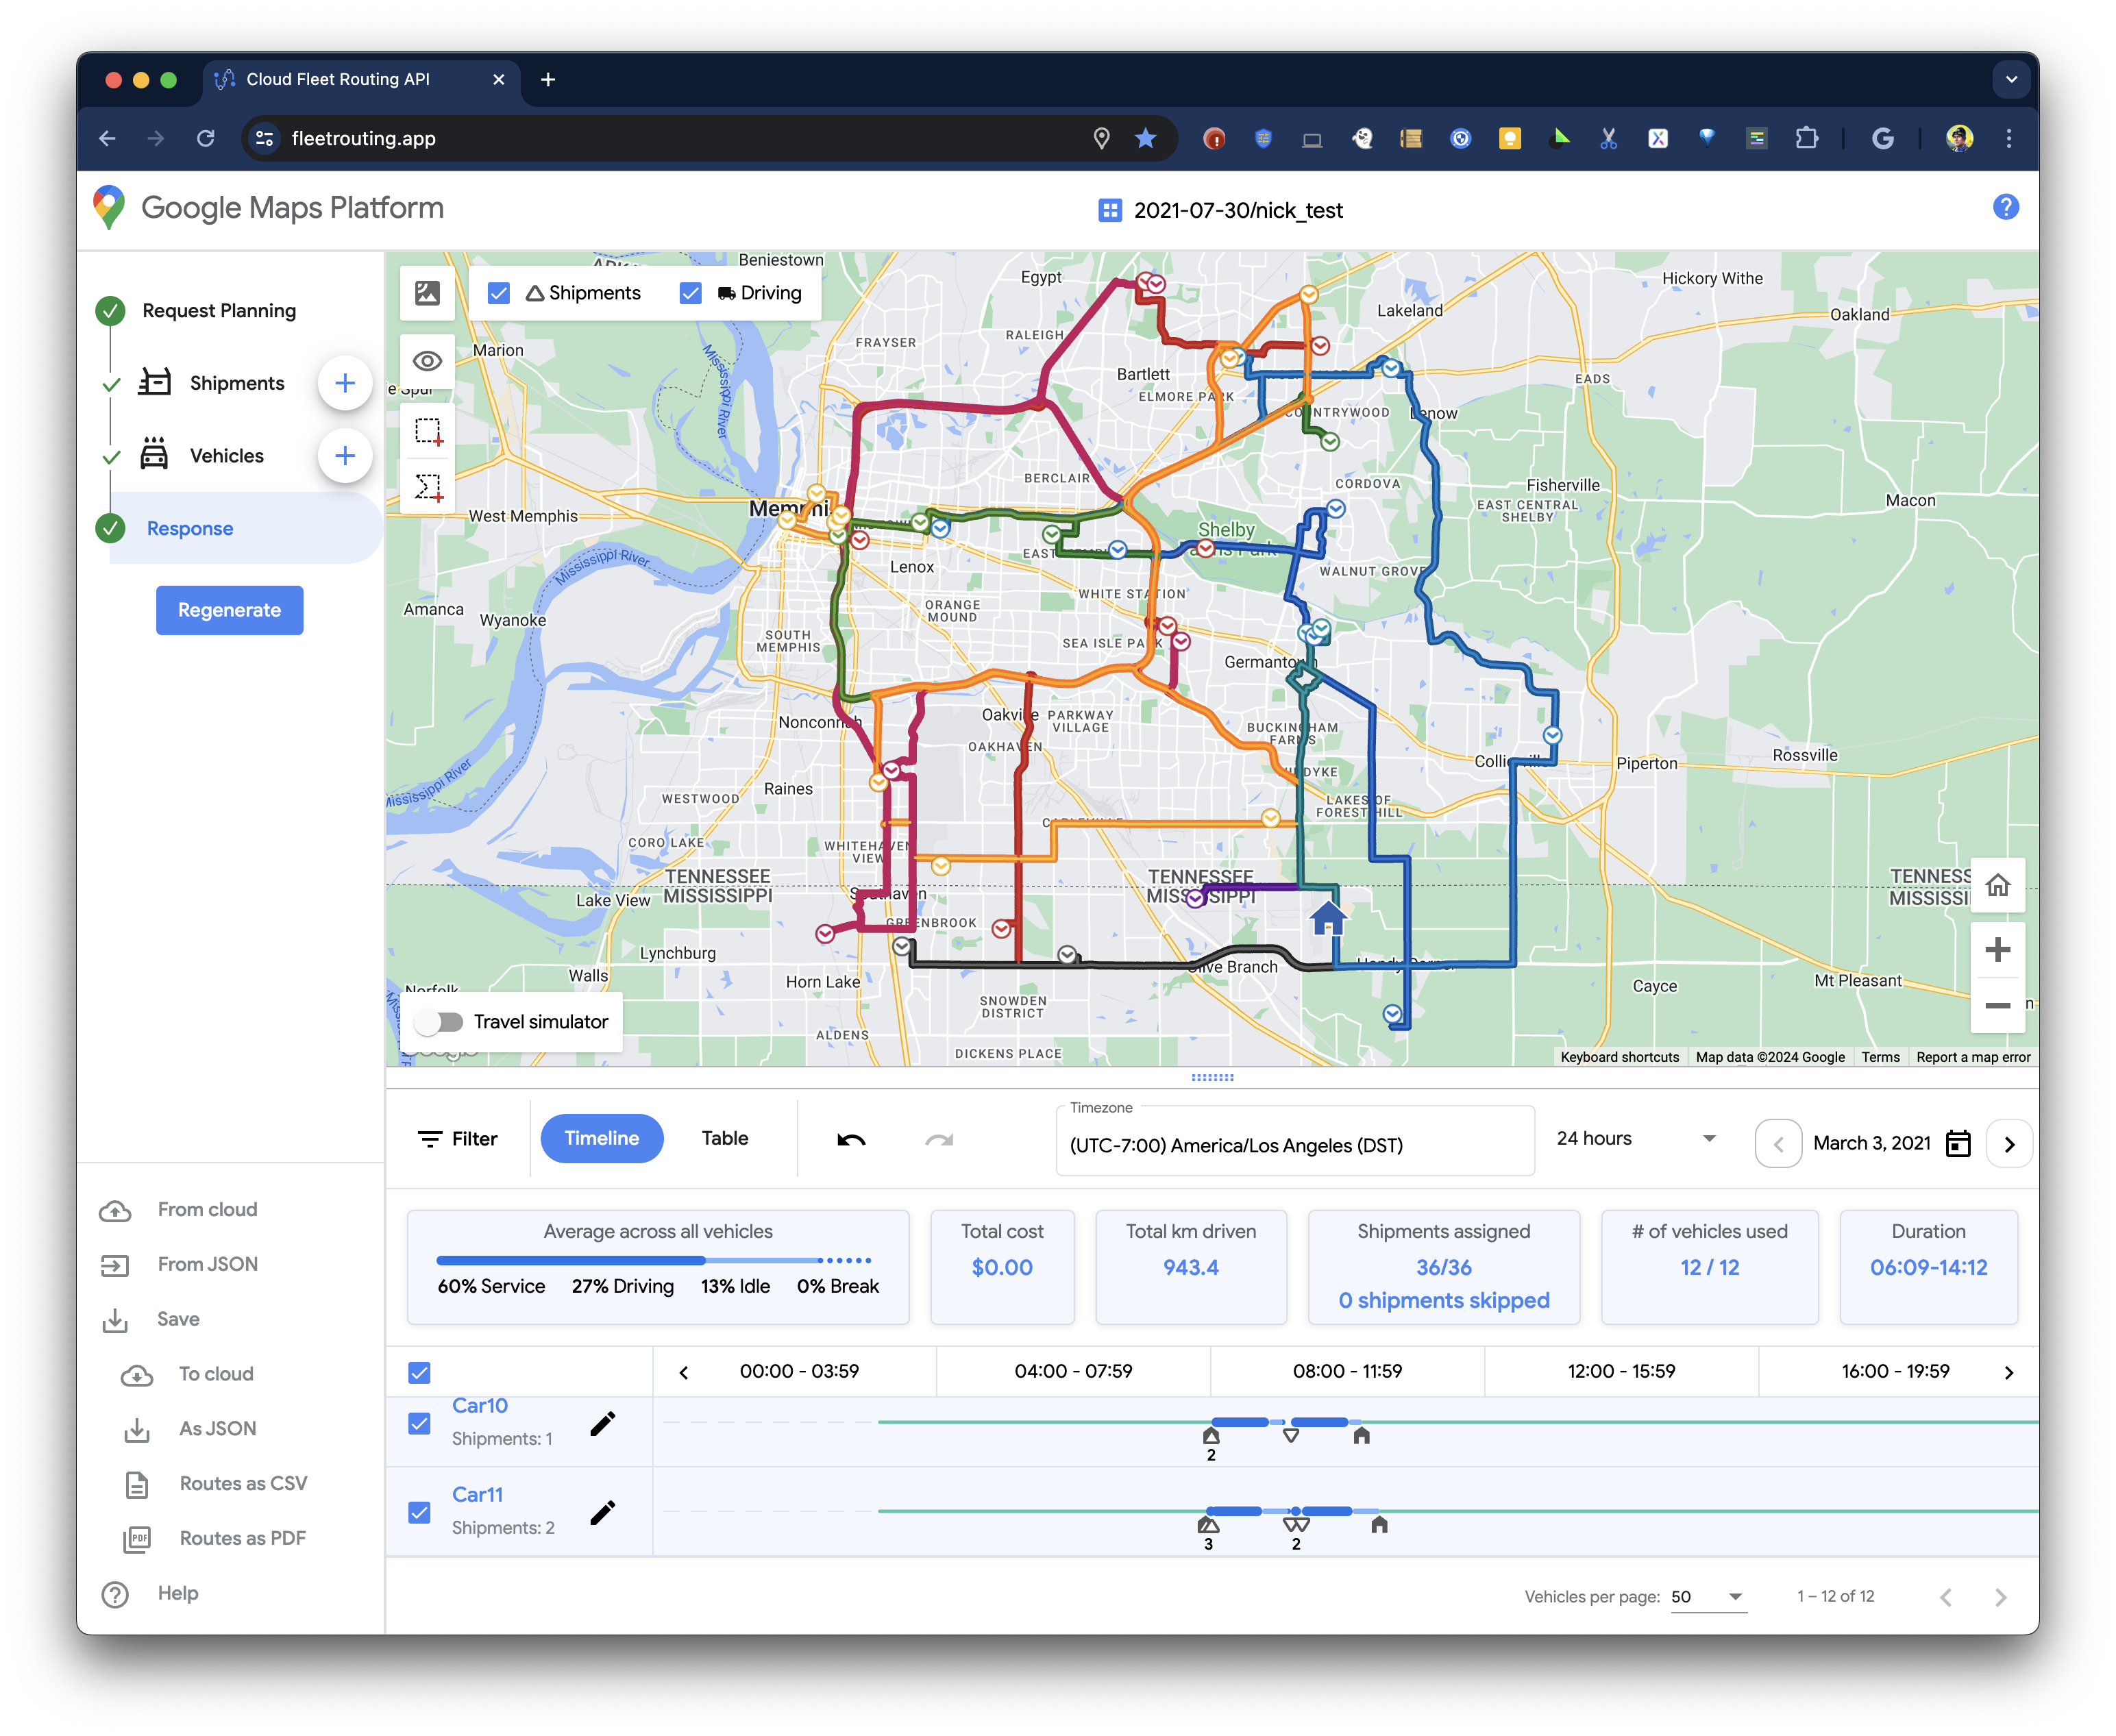 Plan more efficient routes and complete tasks using Route Optimization